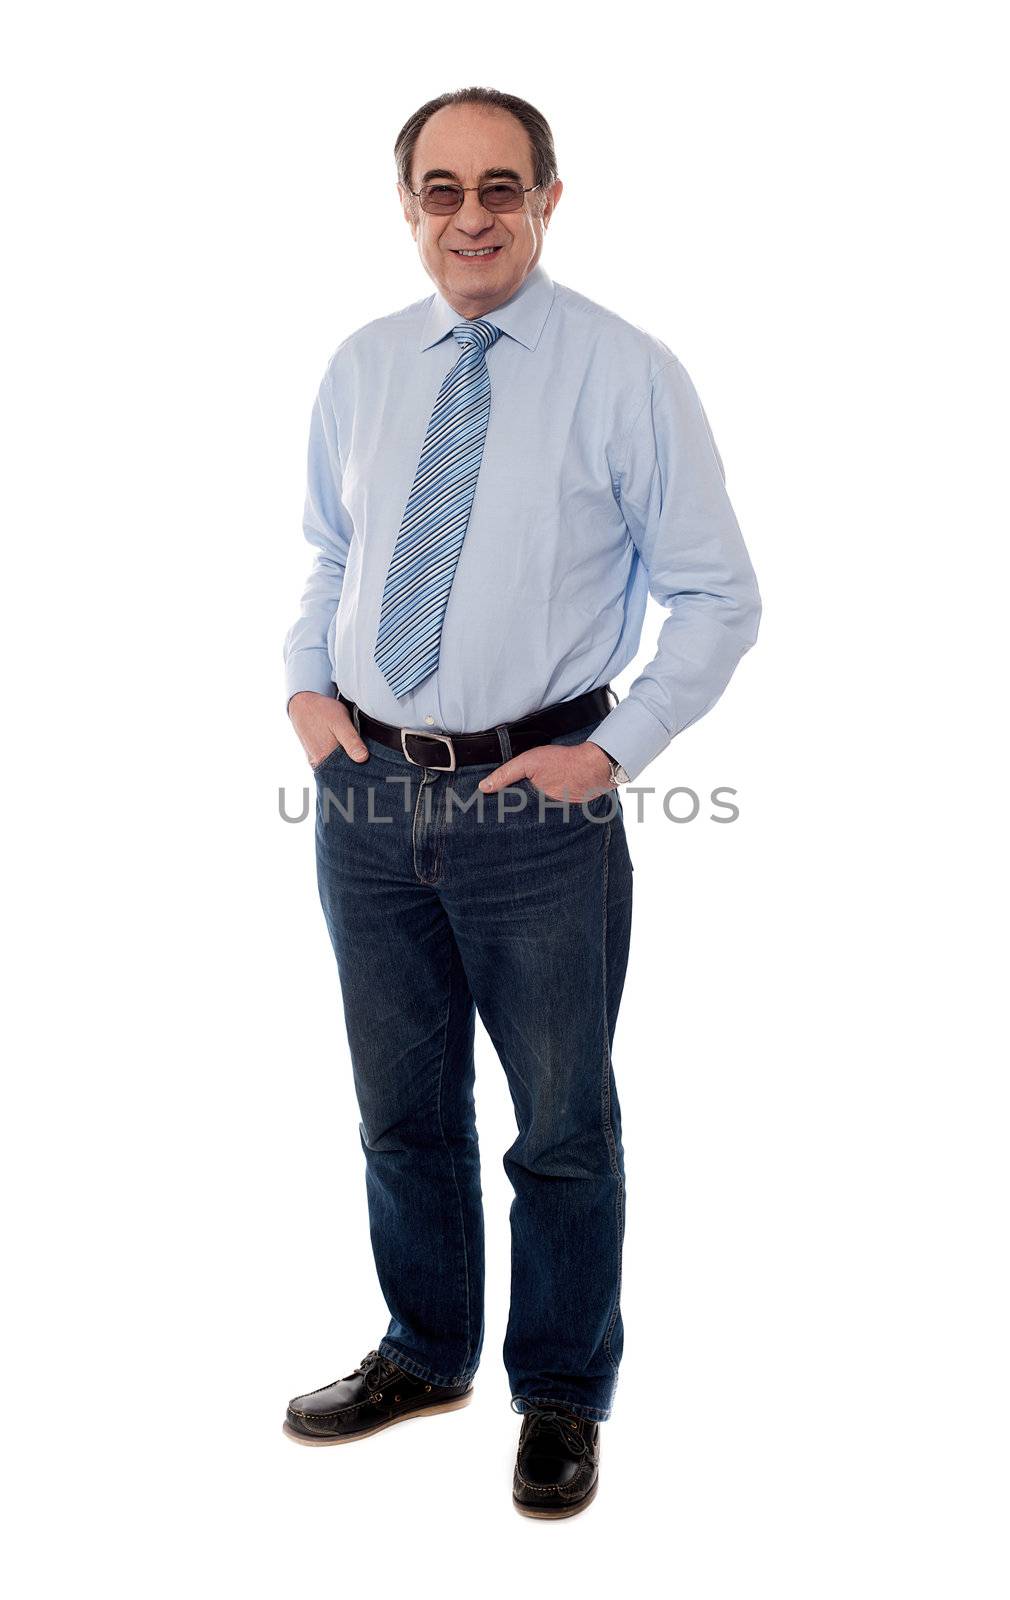 Relaxed old man posing with hands in pocket, casual style